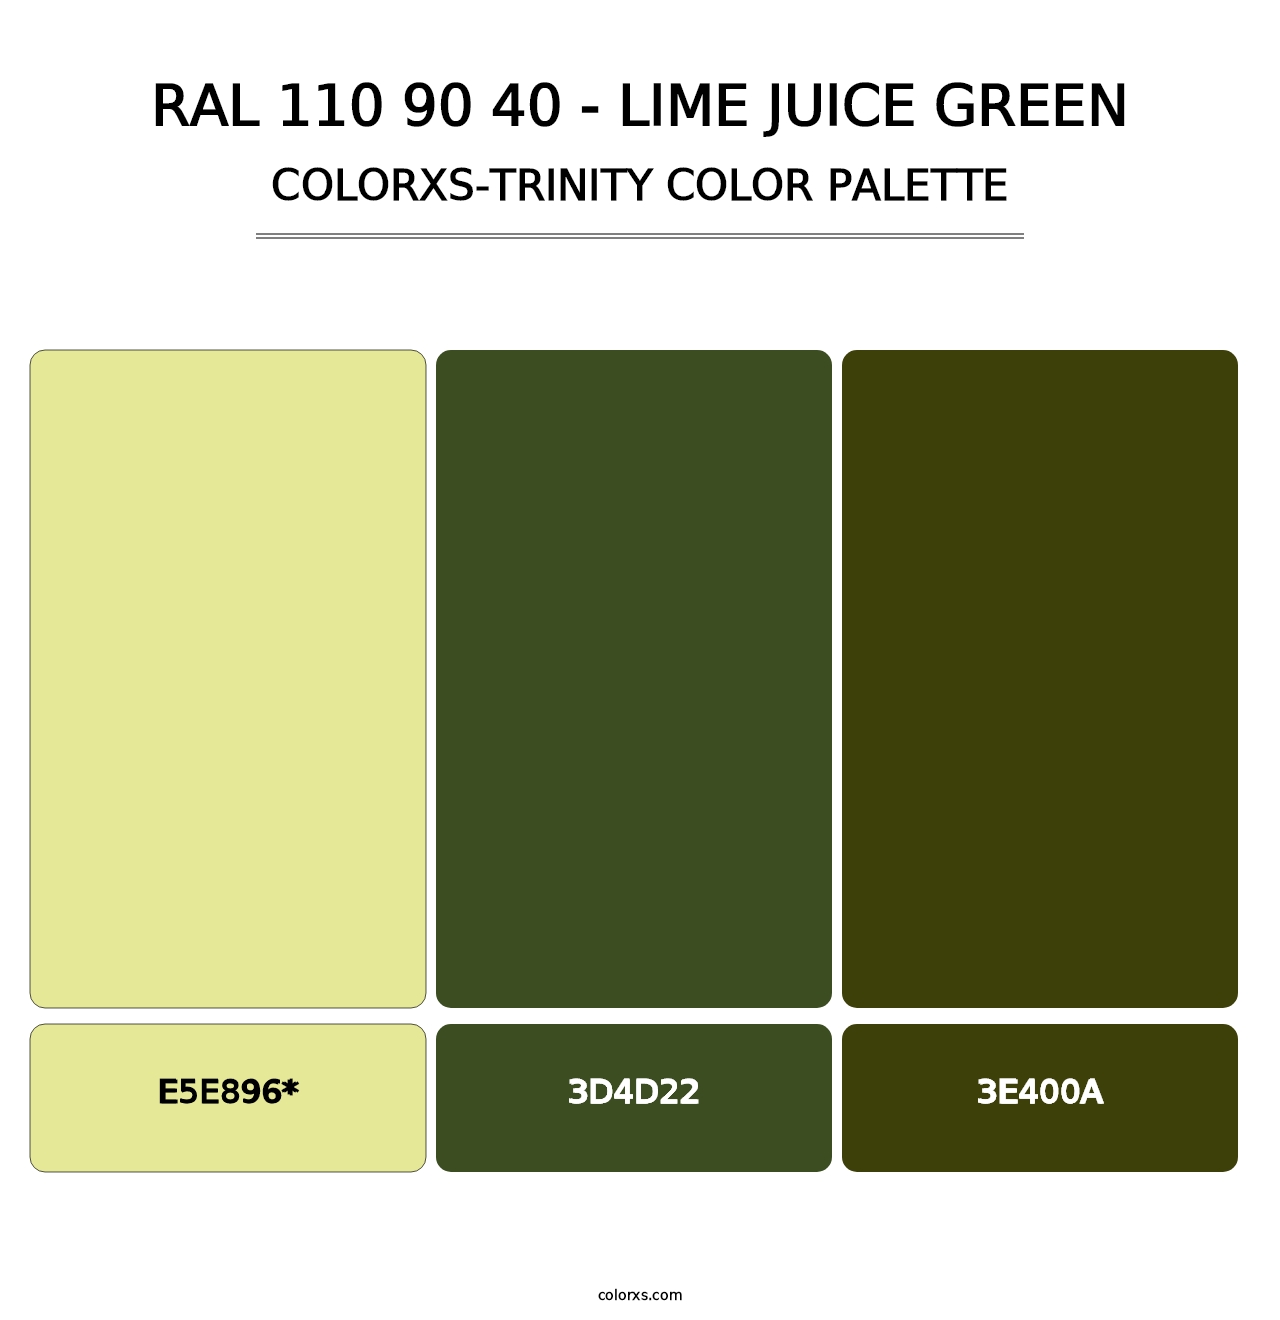 RAL 110 90 40 - Lime Juice Green - Colorxs Trinity Palette